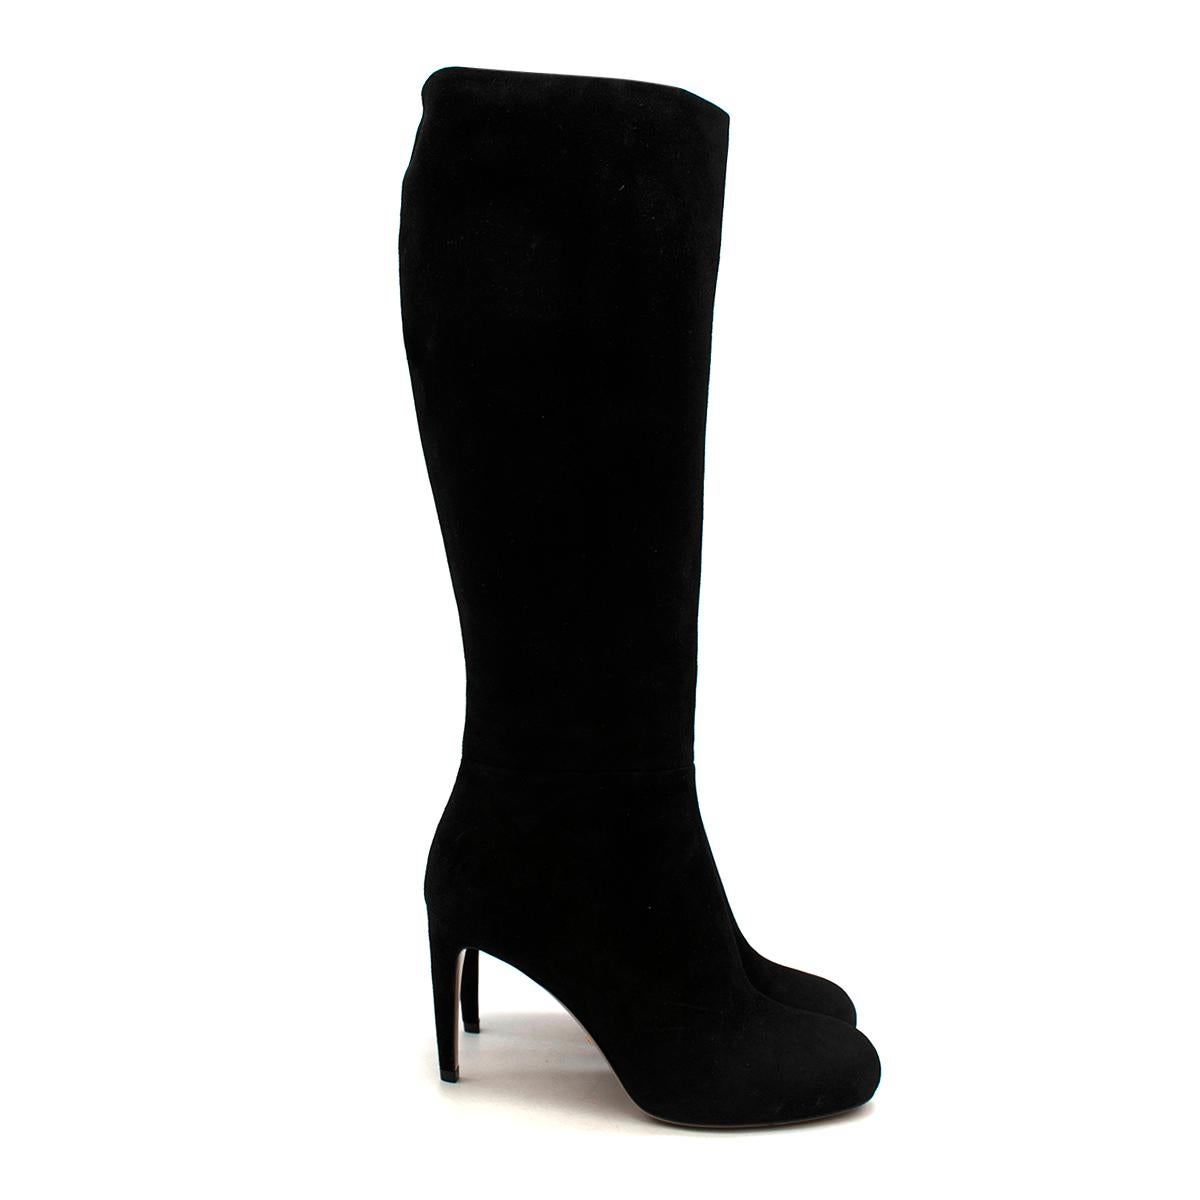 Gucci Black Suede Knee High Heeled Boots

- Made of soft suede 
- Classic style 
- Round toes 
- Stiletto heels 
- Soft leather lining 
- Zip fastening ot the sides 
- Timeless versatile design 

Materials:
Main: suede 
Lining: leather 
Soles: